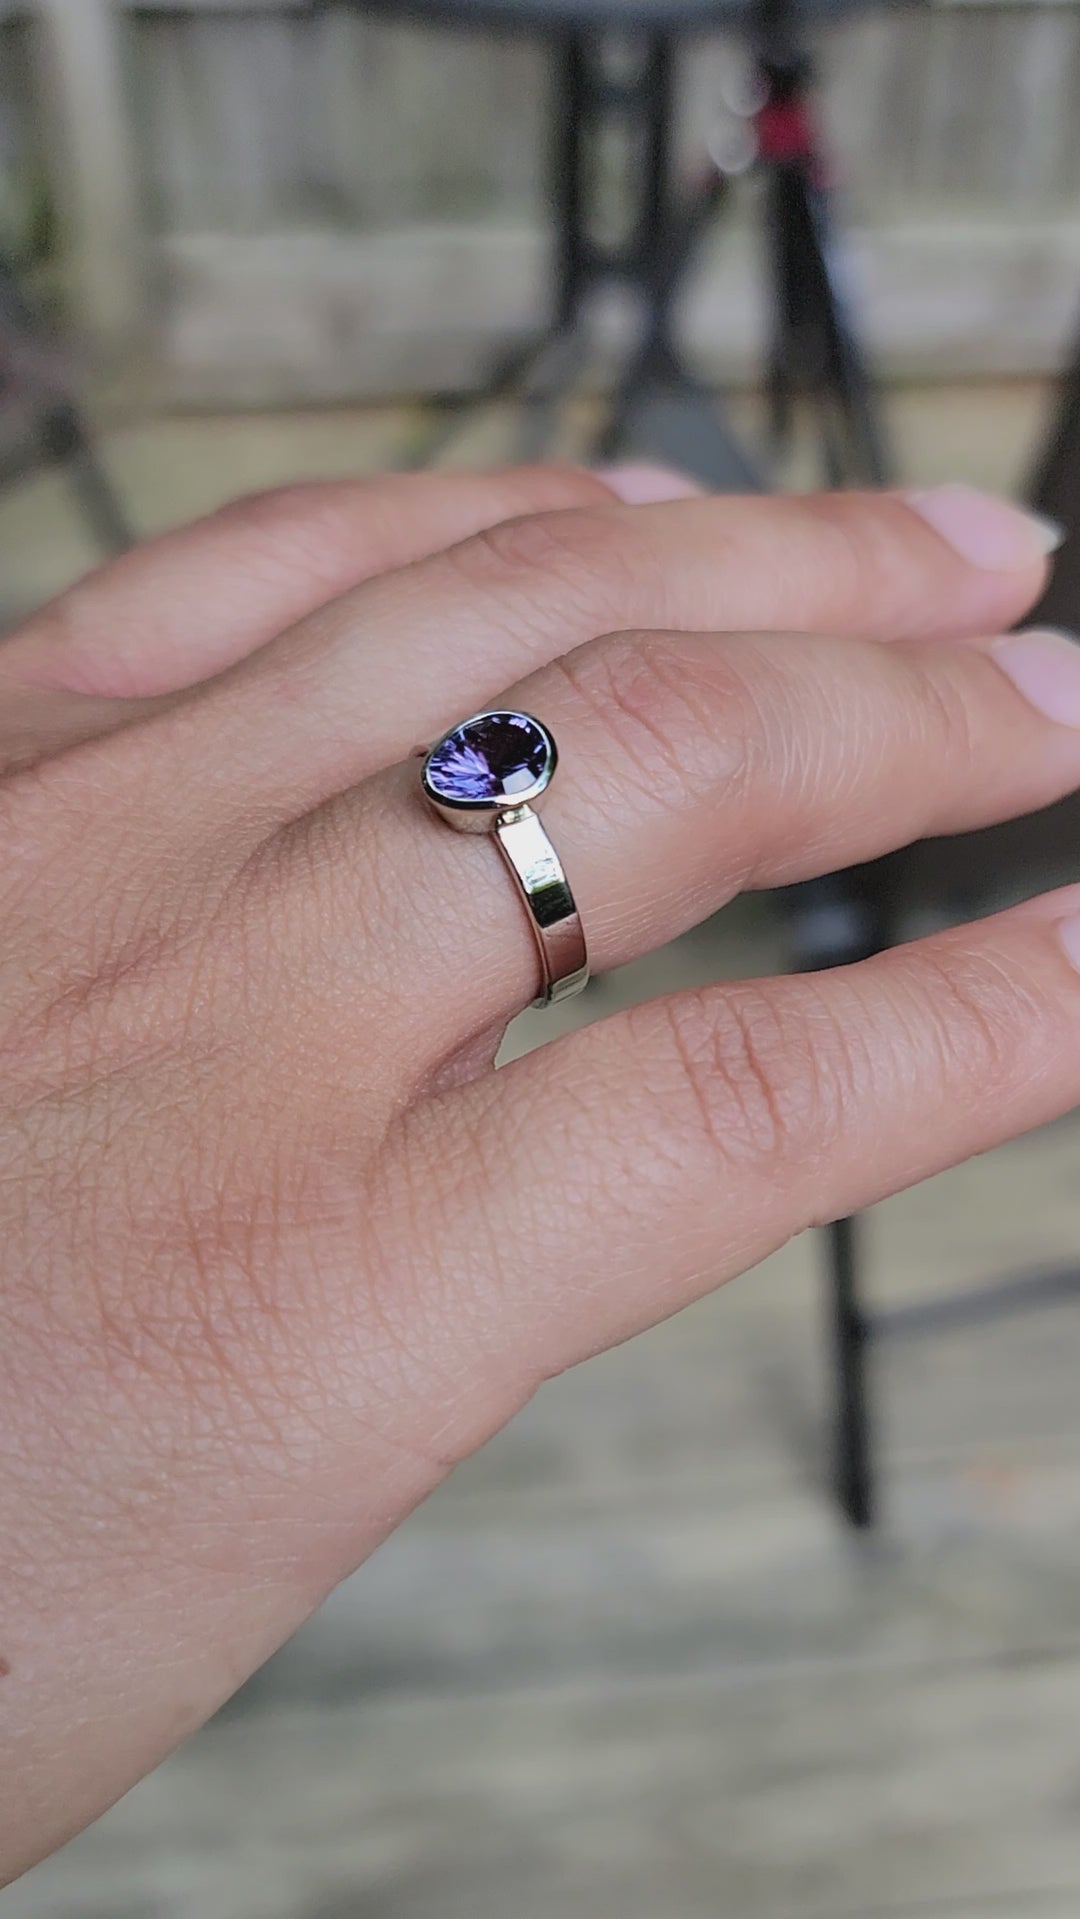 Medium Weight White Gold Bezel Ring Setting - Fantasy Cut Purple Sapphire Depicted (Setting Only, Center Stone Sold Separately)